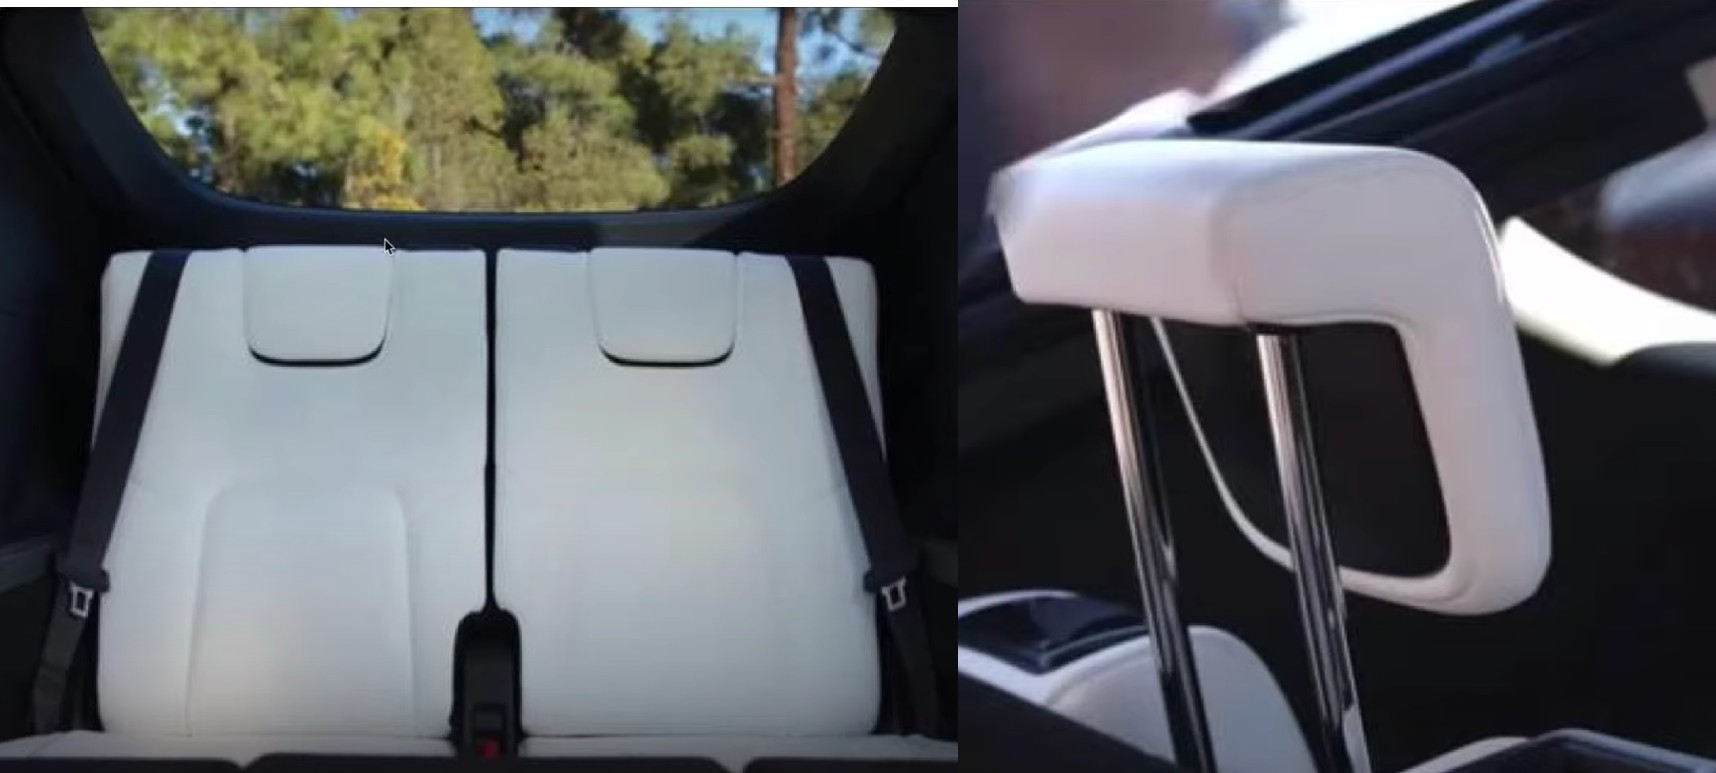 Tesla-model-y-7-seat-3rd-row-pictures